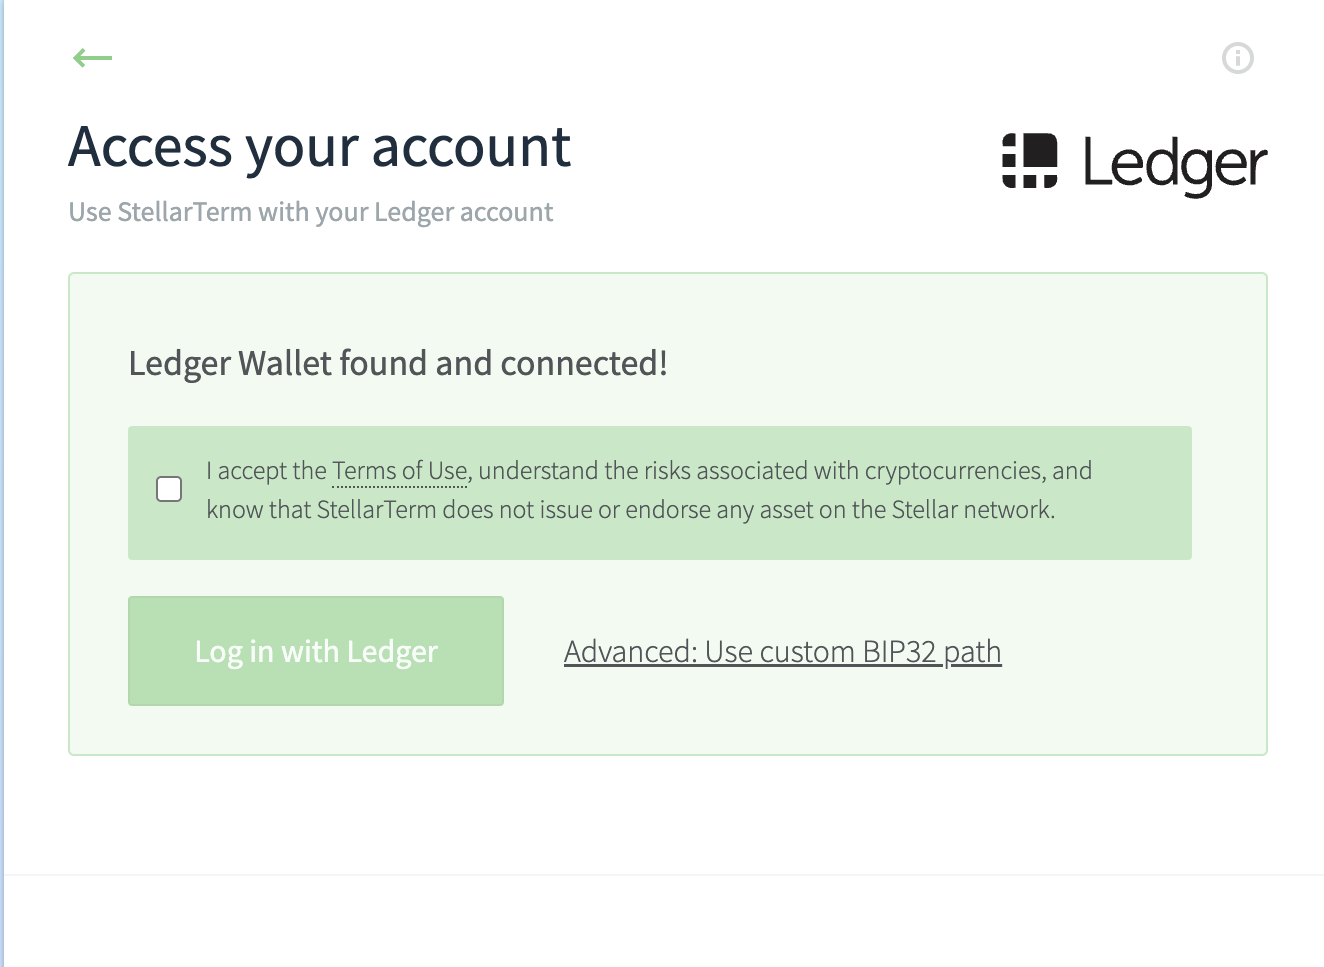 Ledger_Wallet_found_and_connected.png